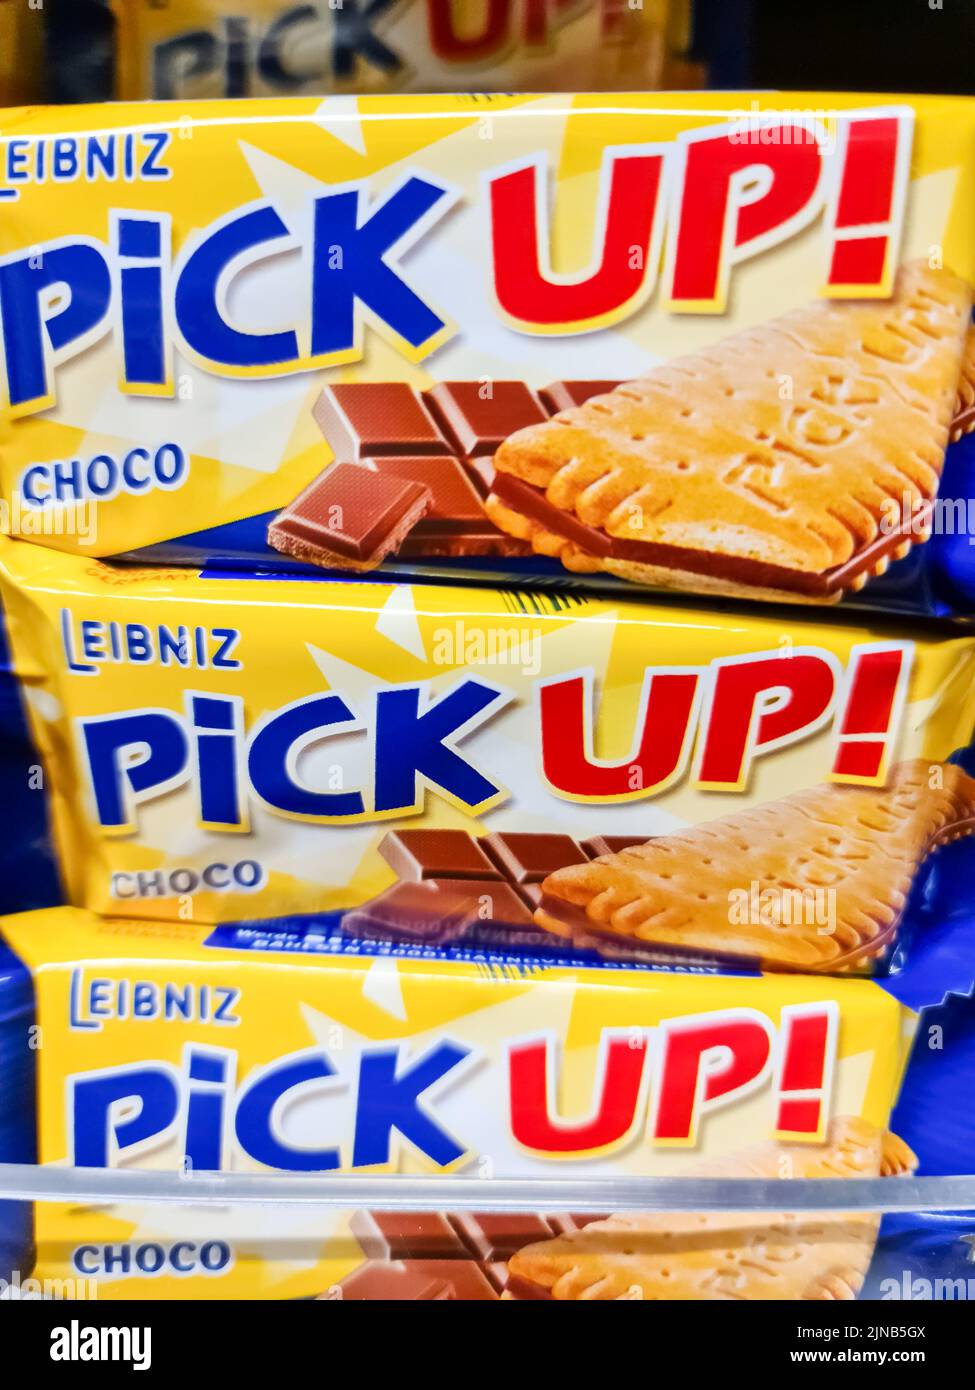 photography hi-res biscuit stock up Alamy images Pick and -